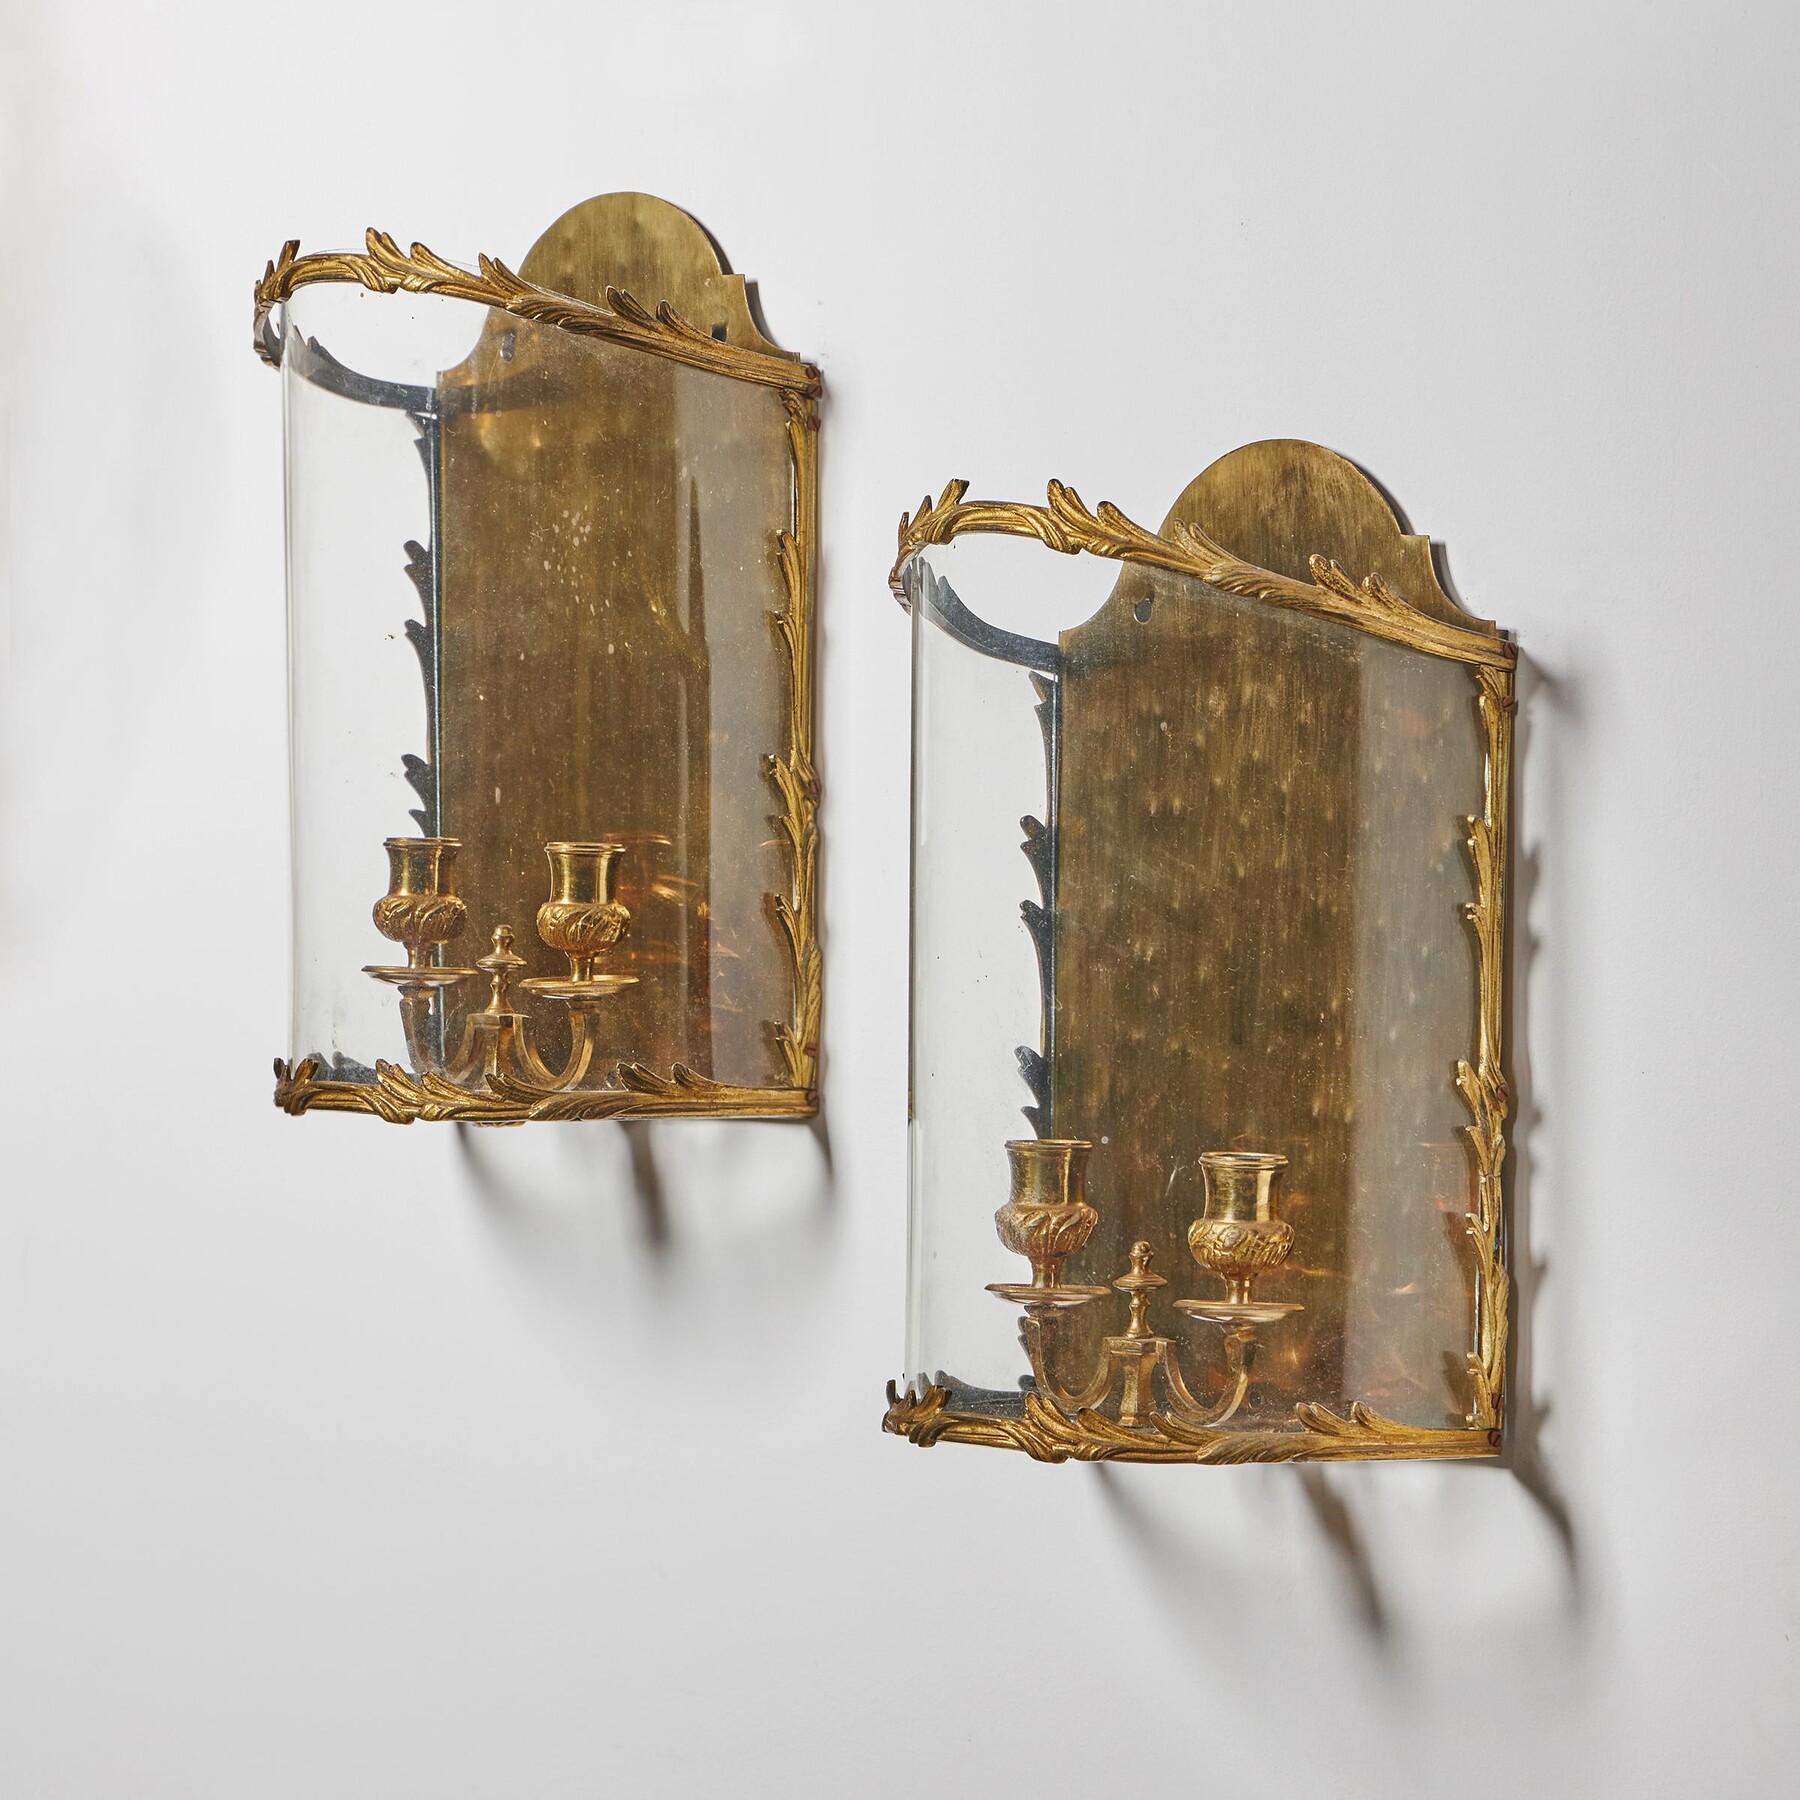 An Unusual Pair of Early 20th Century Louis XV Style Bow Fronted Wall Lanterns Executed in Gilt Brass 

French - Circa 1900

These fine wall lanterns feature two finely cast candle arms attached to a polished brass base and hammered reflector back